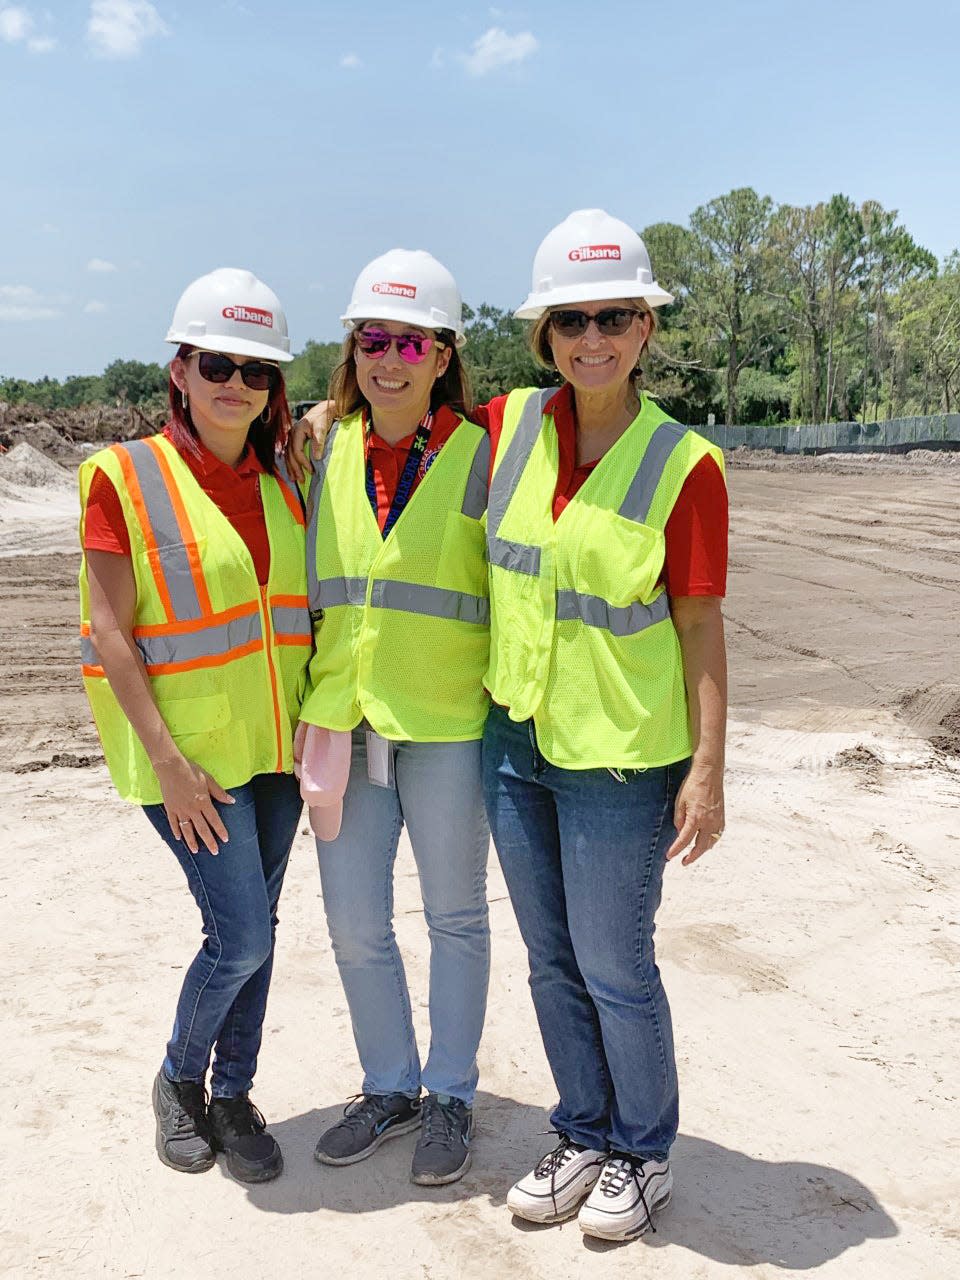 Dreamers Academy Registrar Erica Rivera, founder Geri Chaffee, and Dr. Cathy Rodriguez, Head of School at the site of the new campus.